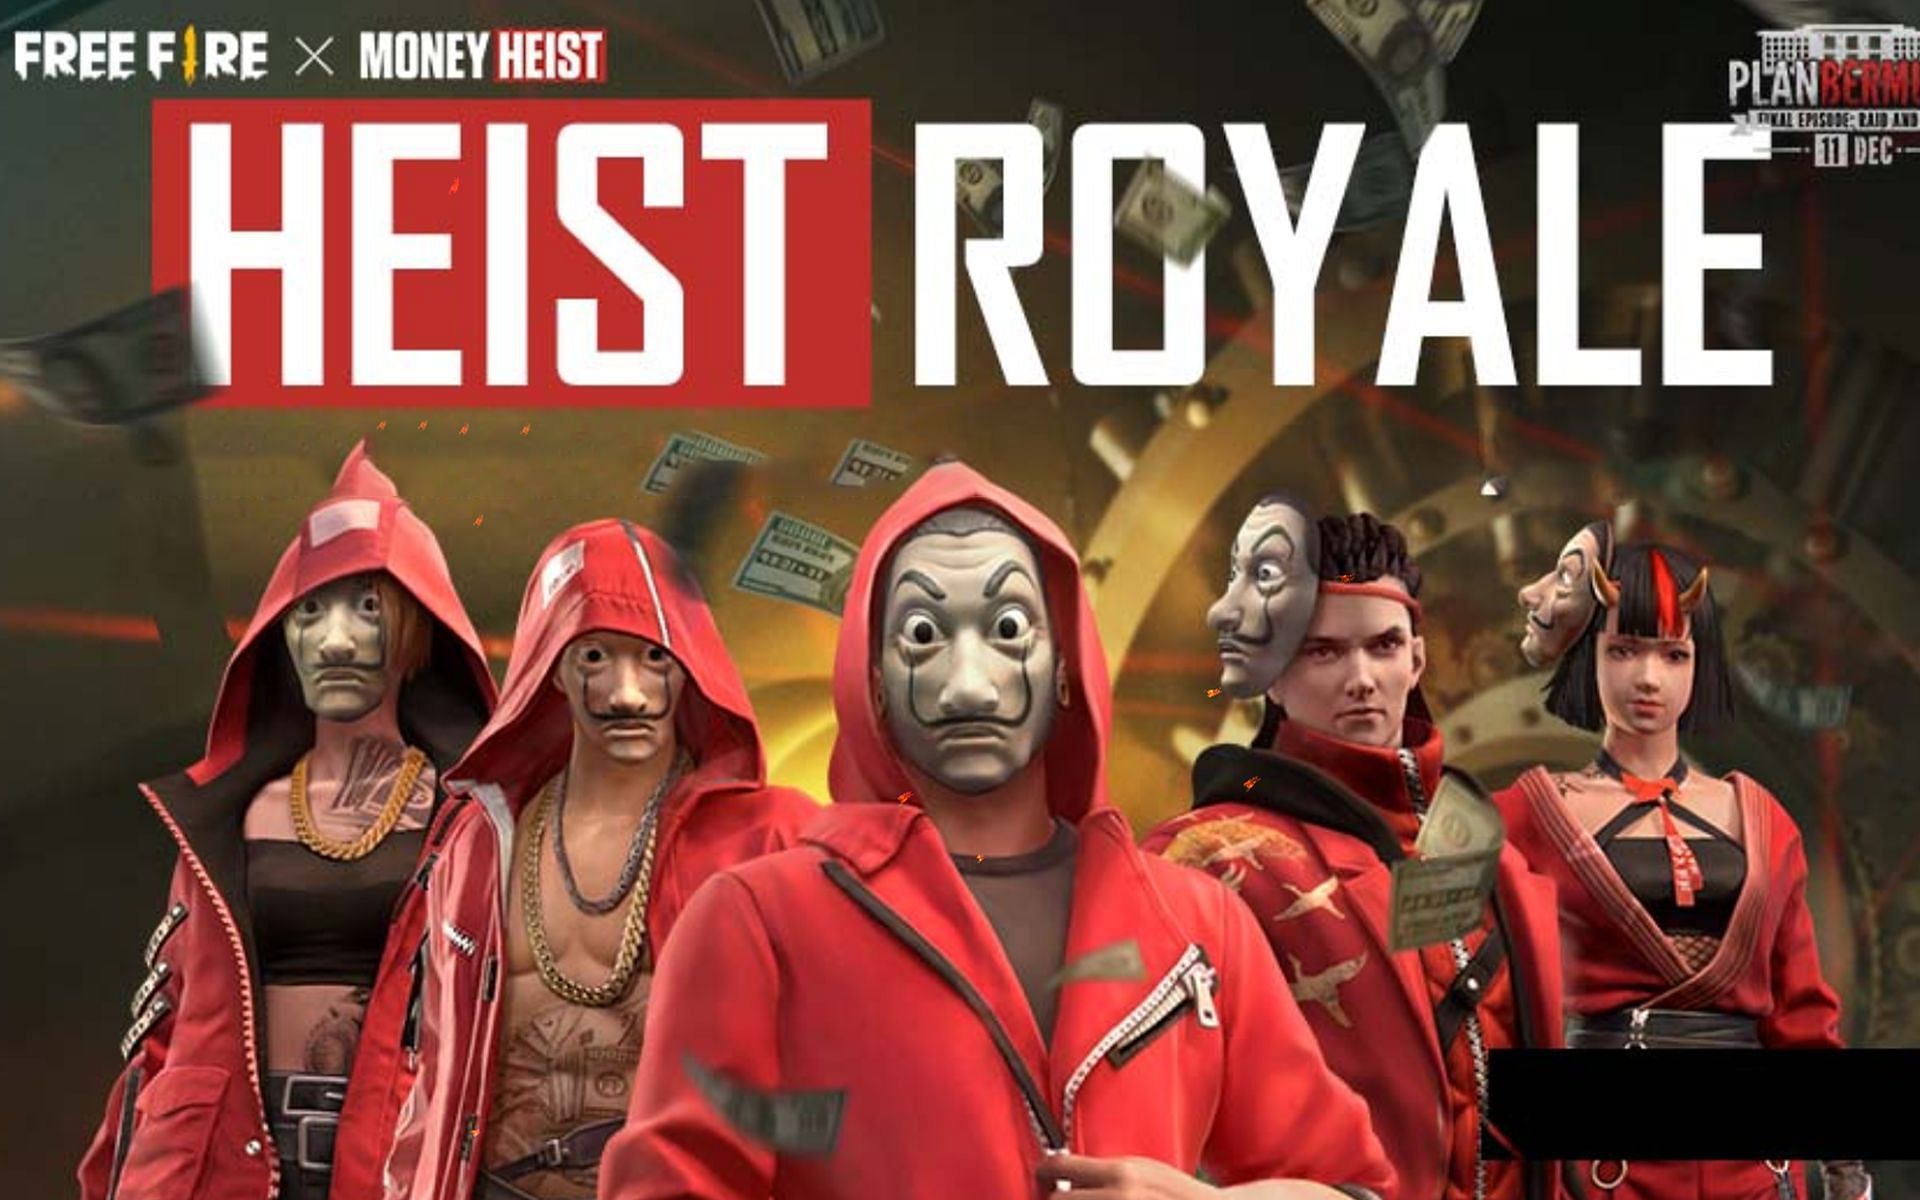 Heist Royale in Free Fire has started on 2 December (Image vai Free Fire)